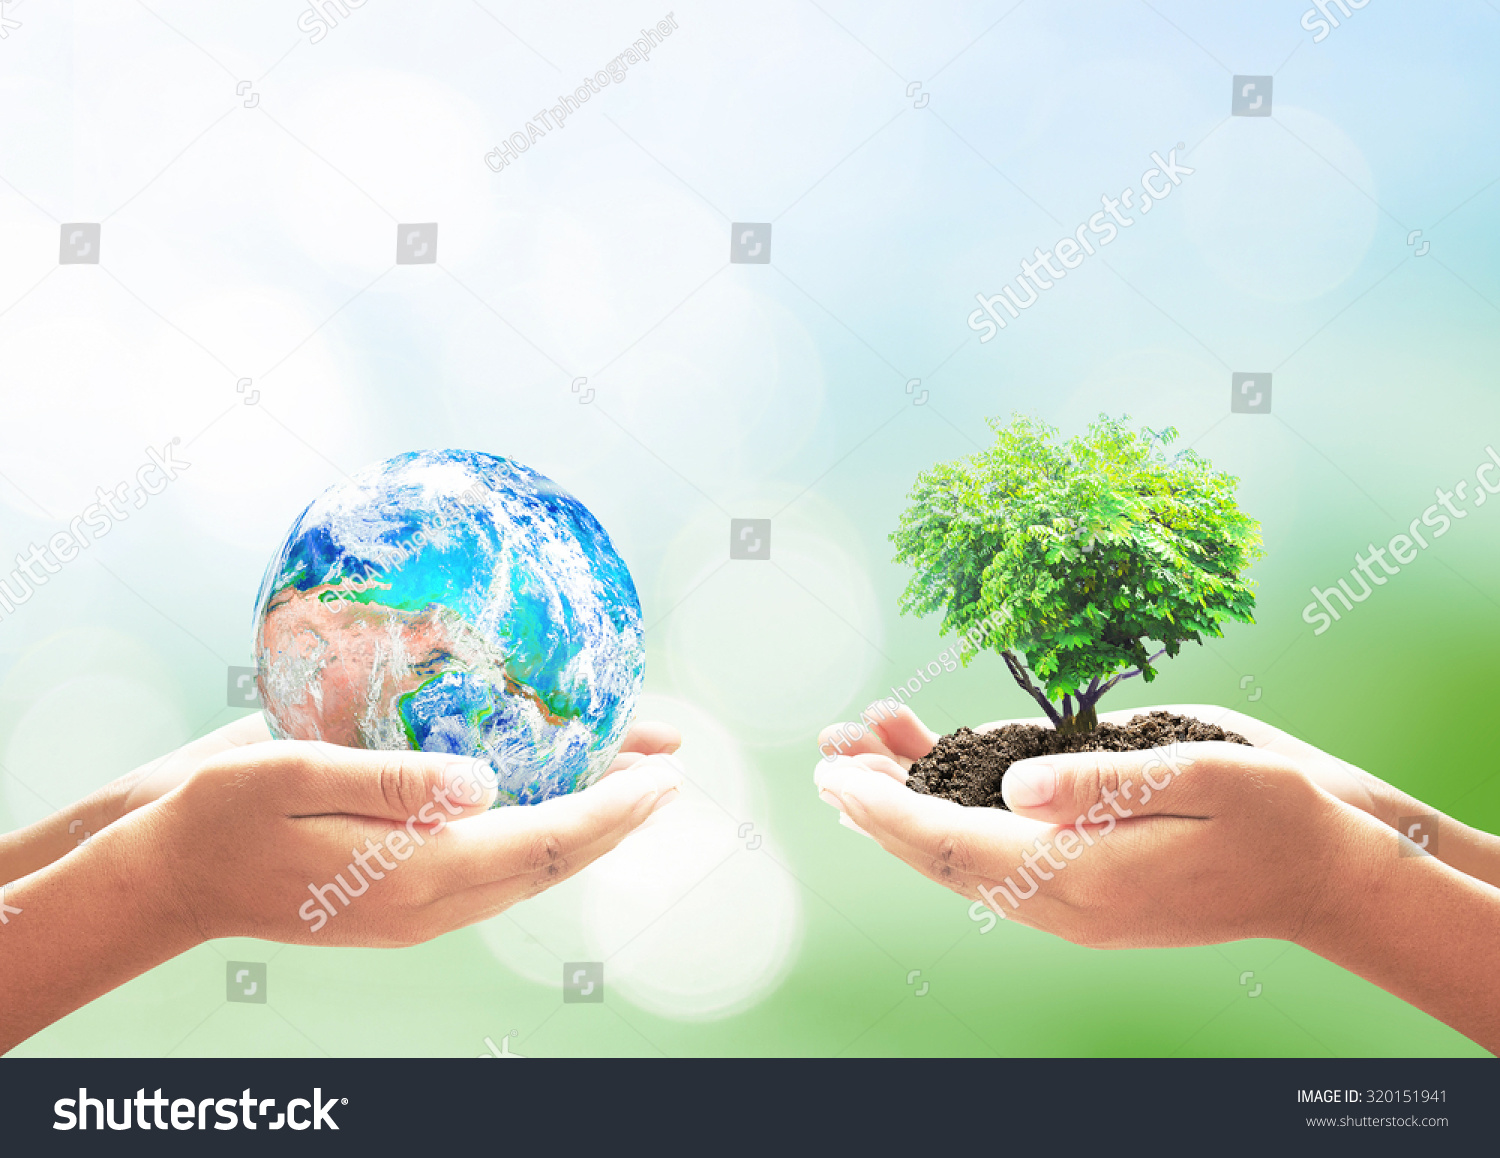 Earth Day concept: Two human hands holding earth globe and heart shape of tree over blurred green nature background. Elements of this image furnished by NASA #320151941